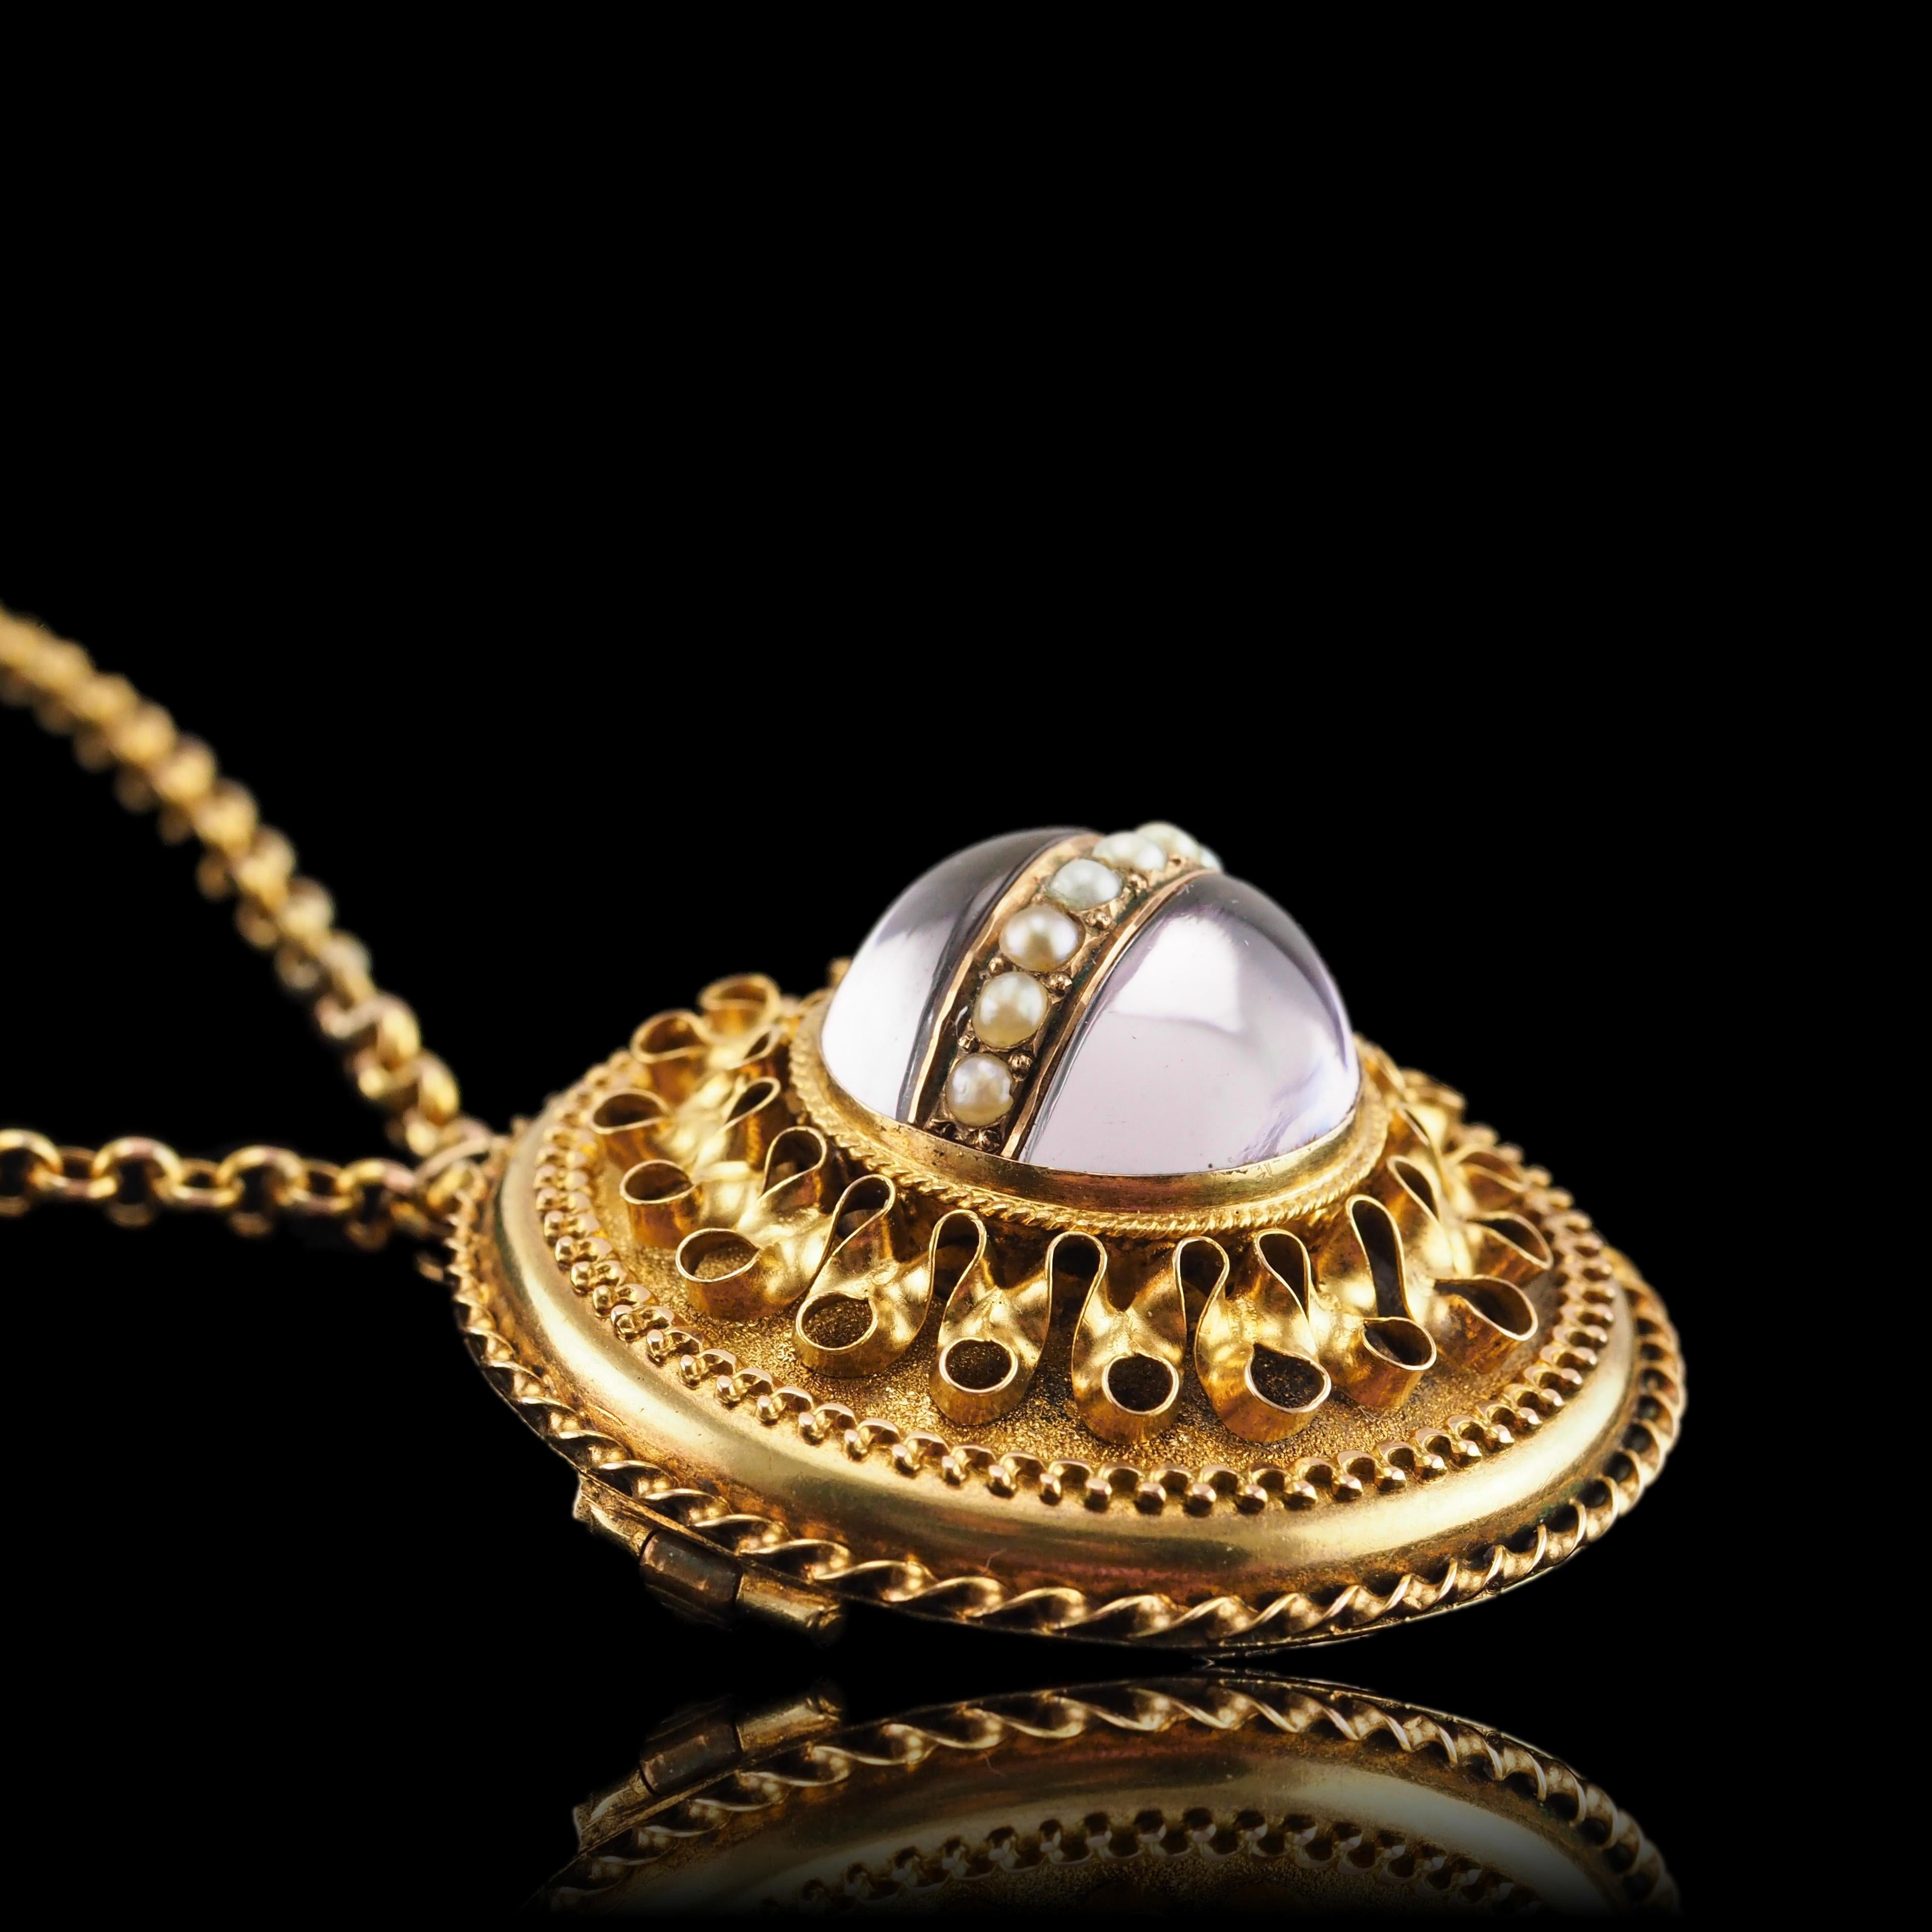 Antique Victorian Etruscan Style Necklace 15K Gold Rock Crystal Pendant c.1870 For Sale 1